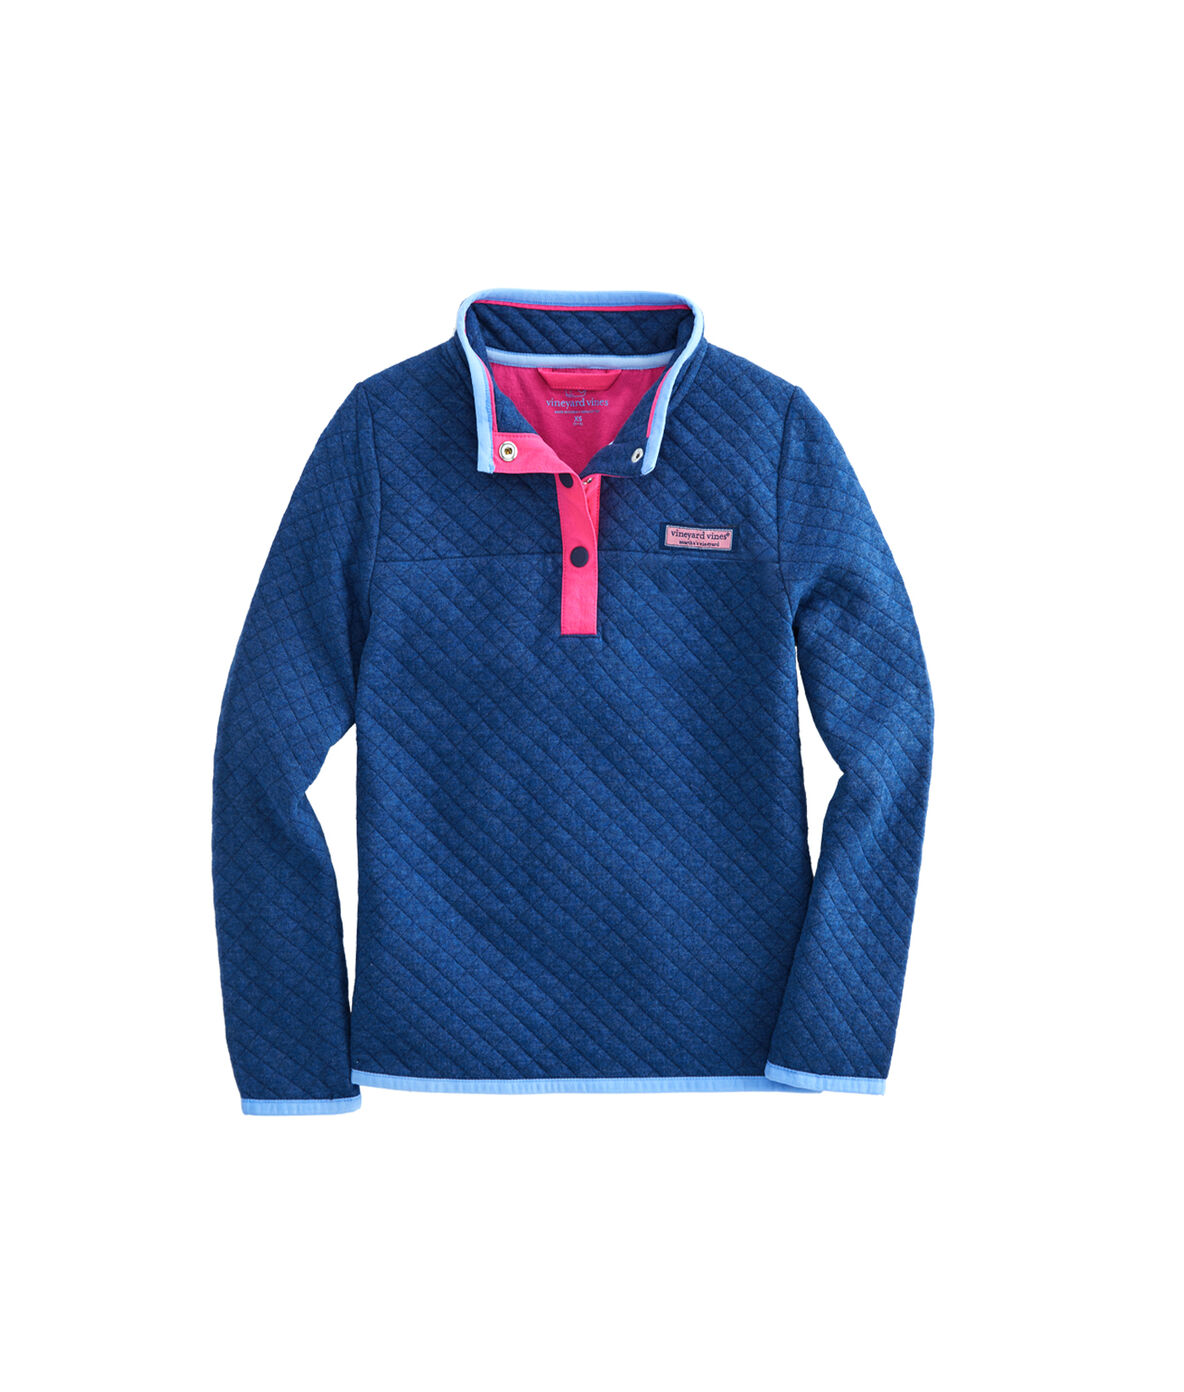 Vineyard Vines Boys Quilted Snap Placket Shep Shirt Pullover